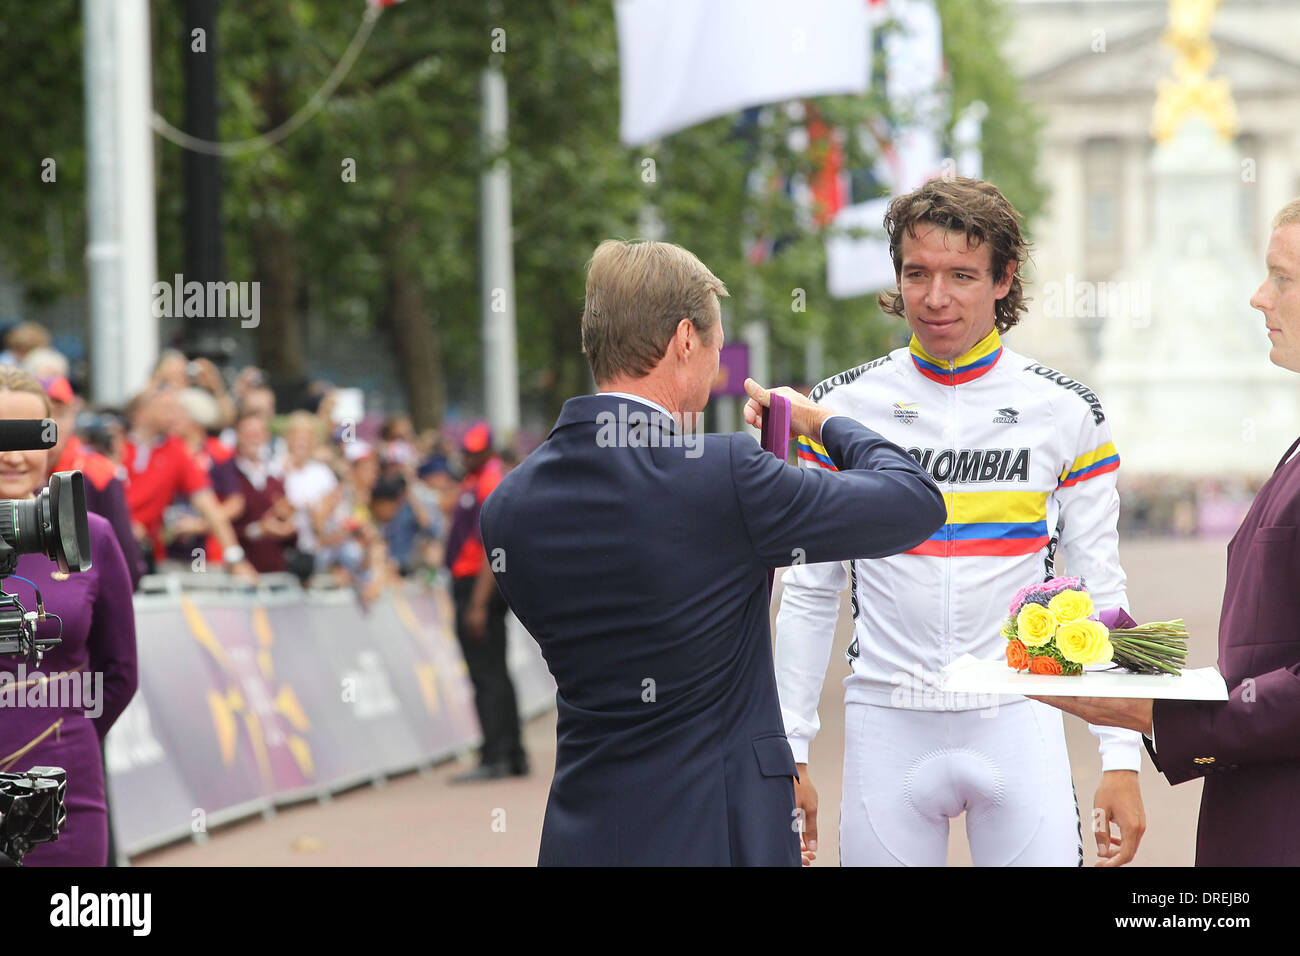 Silver medallist Rigoberto Uran Uran of Colombia presented by Grand Duc of Luxembourg Henri  during the Victory Ceremony for the Men's Road Race Road Cycling on day 1 of the London 2012 Olympic Games London, England - 28.07.12 Stock Photo